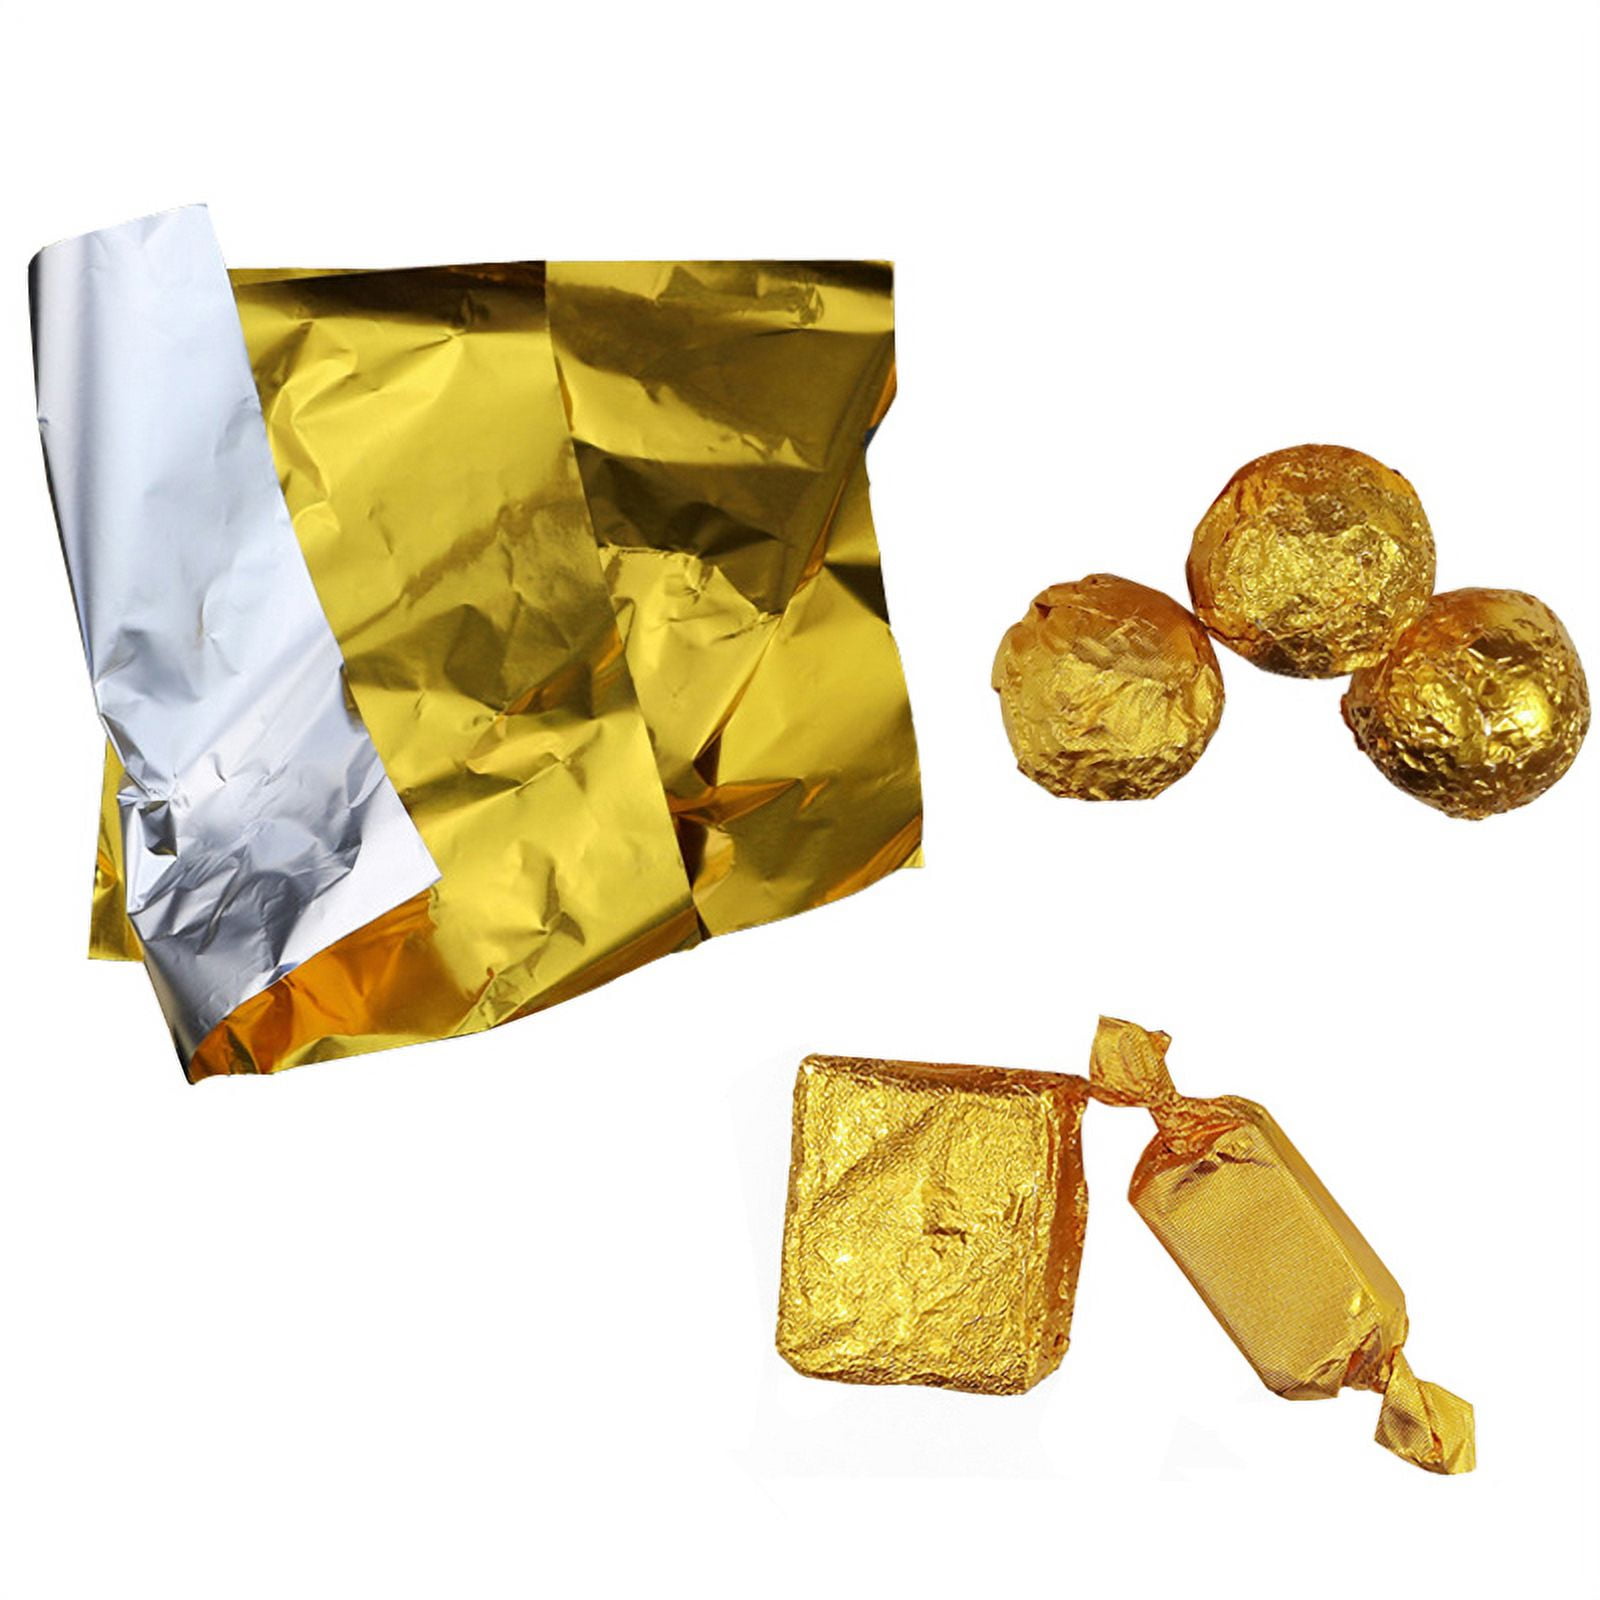 Bake world Bake world 300pcs Aluminium Foil Paper Gold Foil Paper Wrapping  Glossy Paper Gift Package for Packaging Chocolate (Golden) Aluminium Foil(Pack  of 300, 0.13 m) Aluminium Foil Price in India 